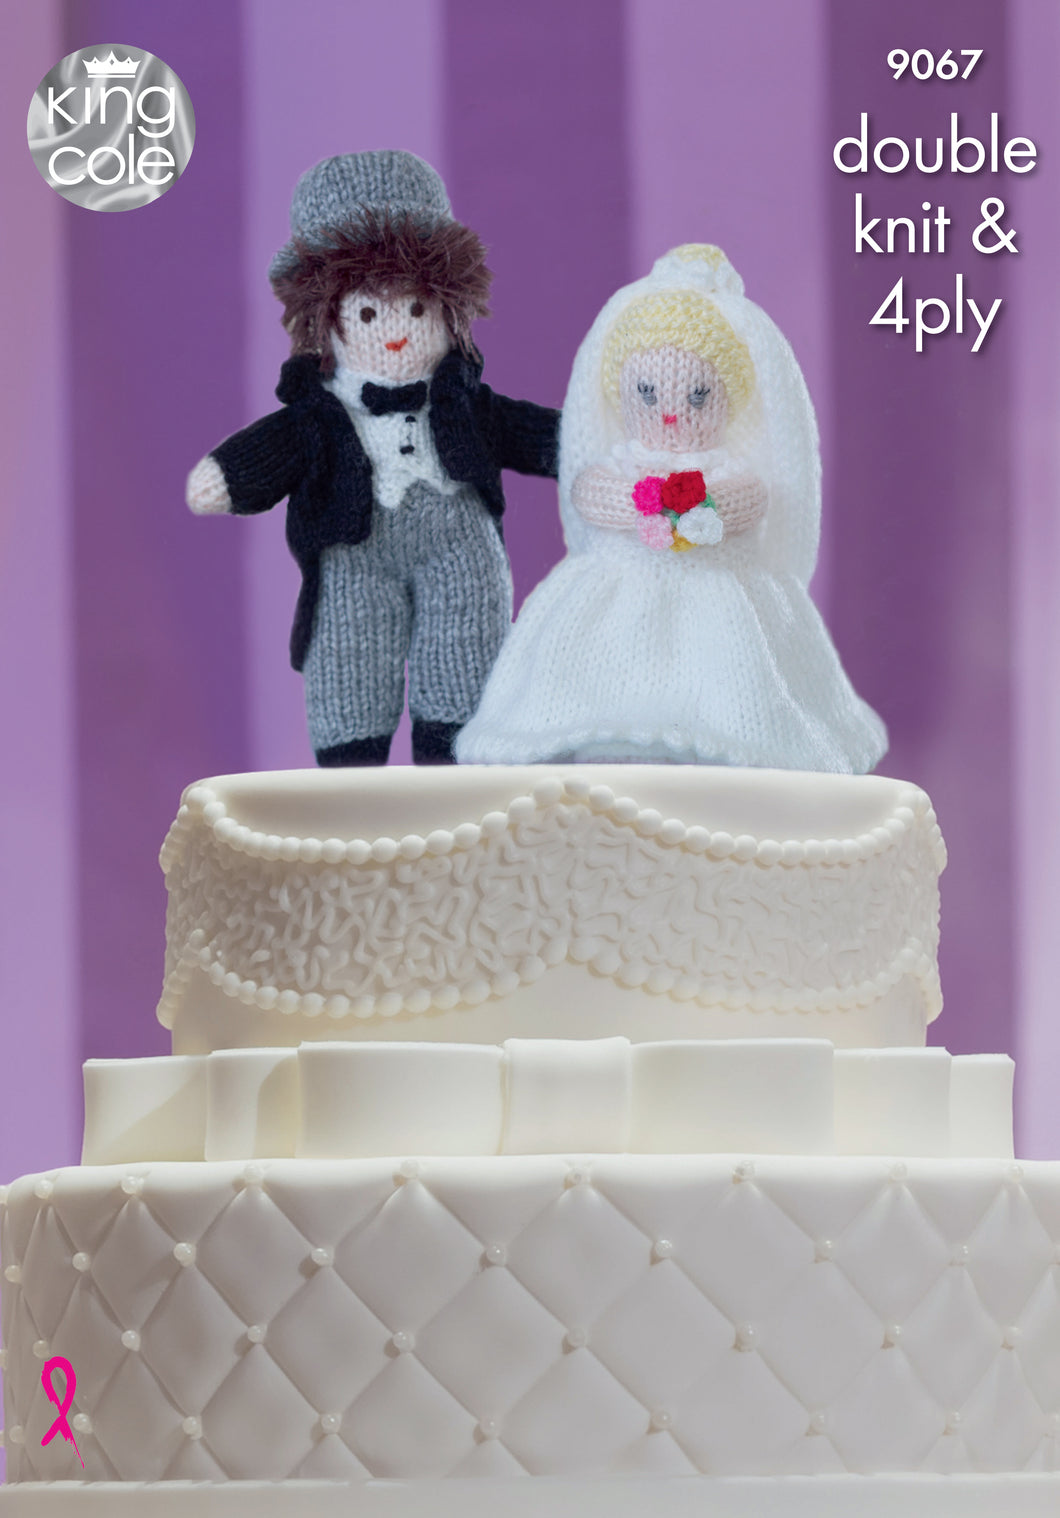 King Cole Pattern 9067: Bride and Groom Cake Toppers